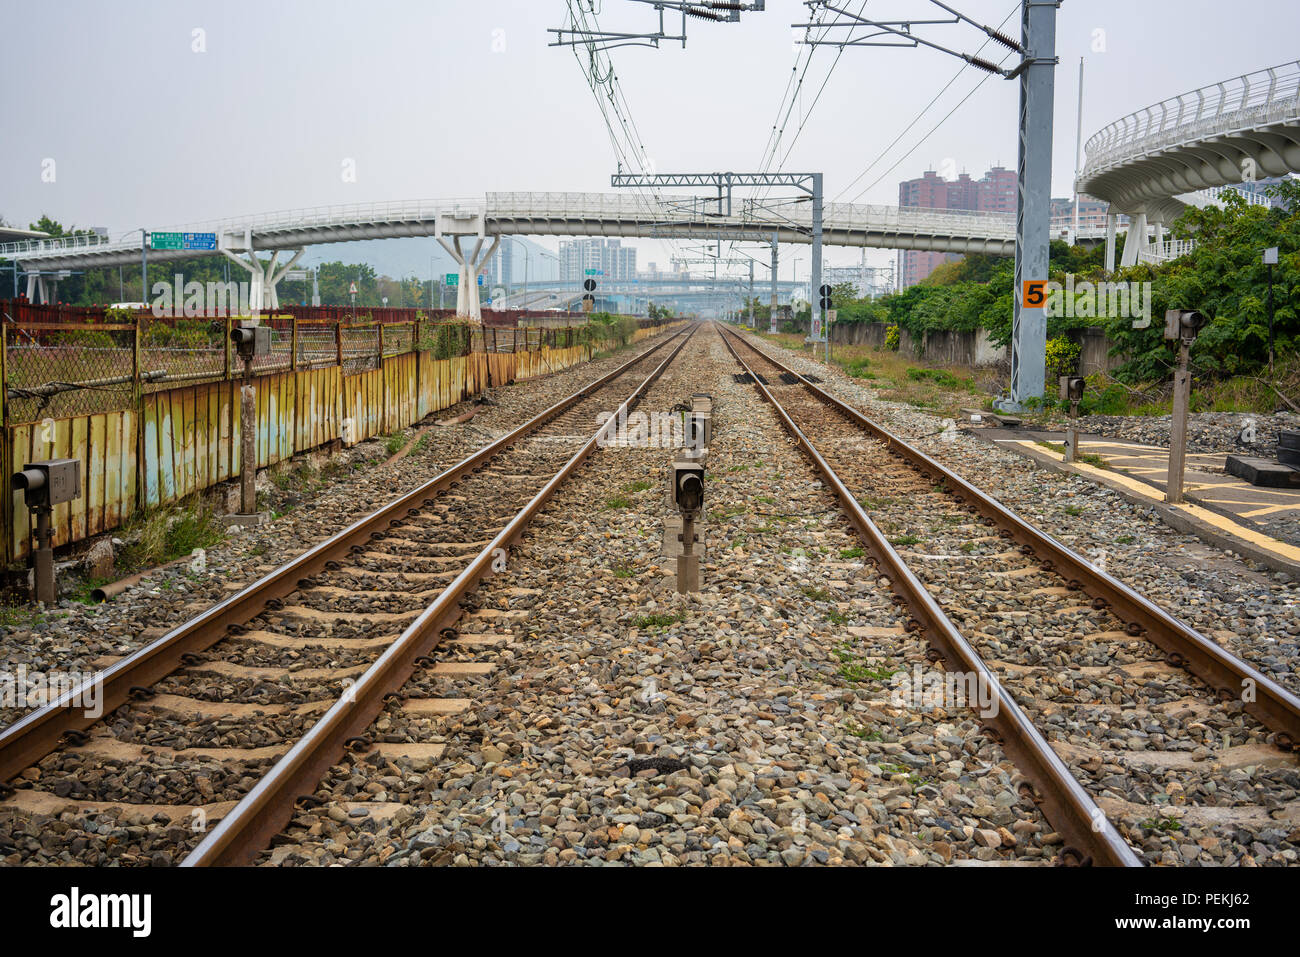 View from middle of railway in Kaohsiung Taiwan Stock Photo